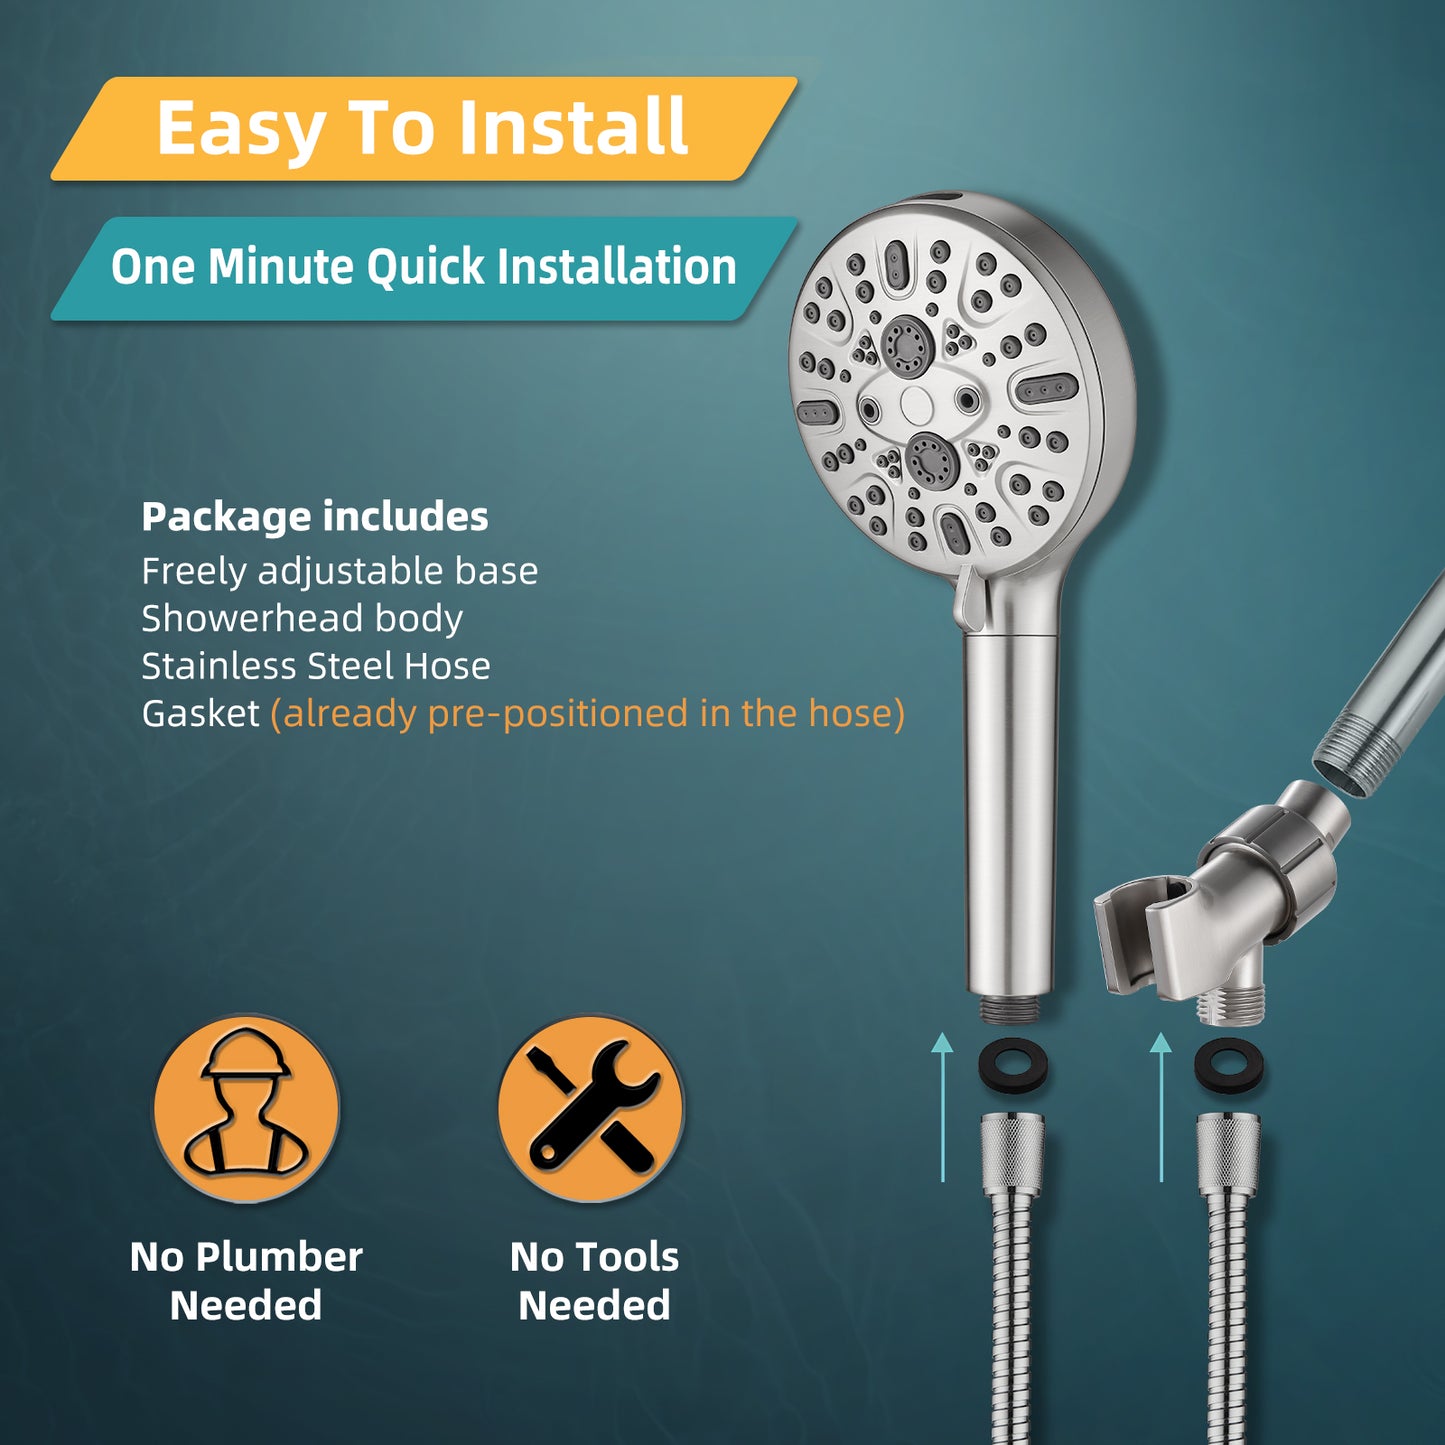 Cobbe Handheld Shower Head with Filter, High Pressure 9 Spray Mode Showerhead Built-in Power Wash with Hose, Bracket and Water Softener for Hard Water Remove Chlorine and Harmful Substance